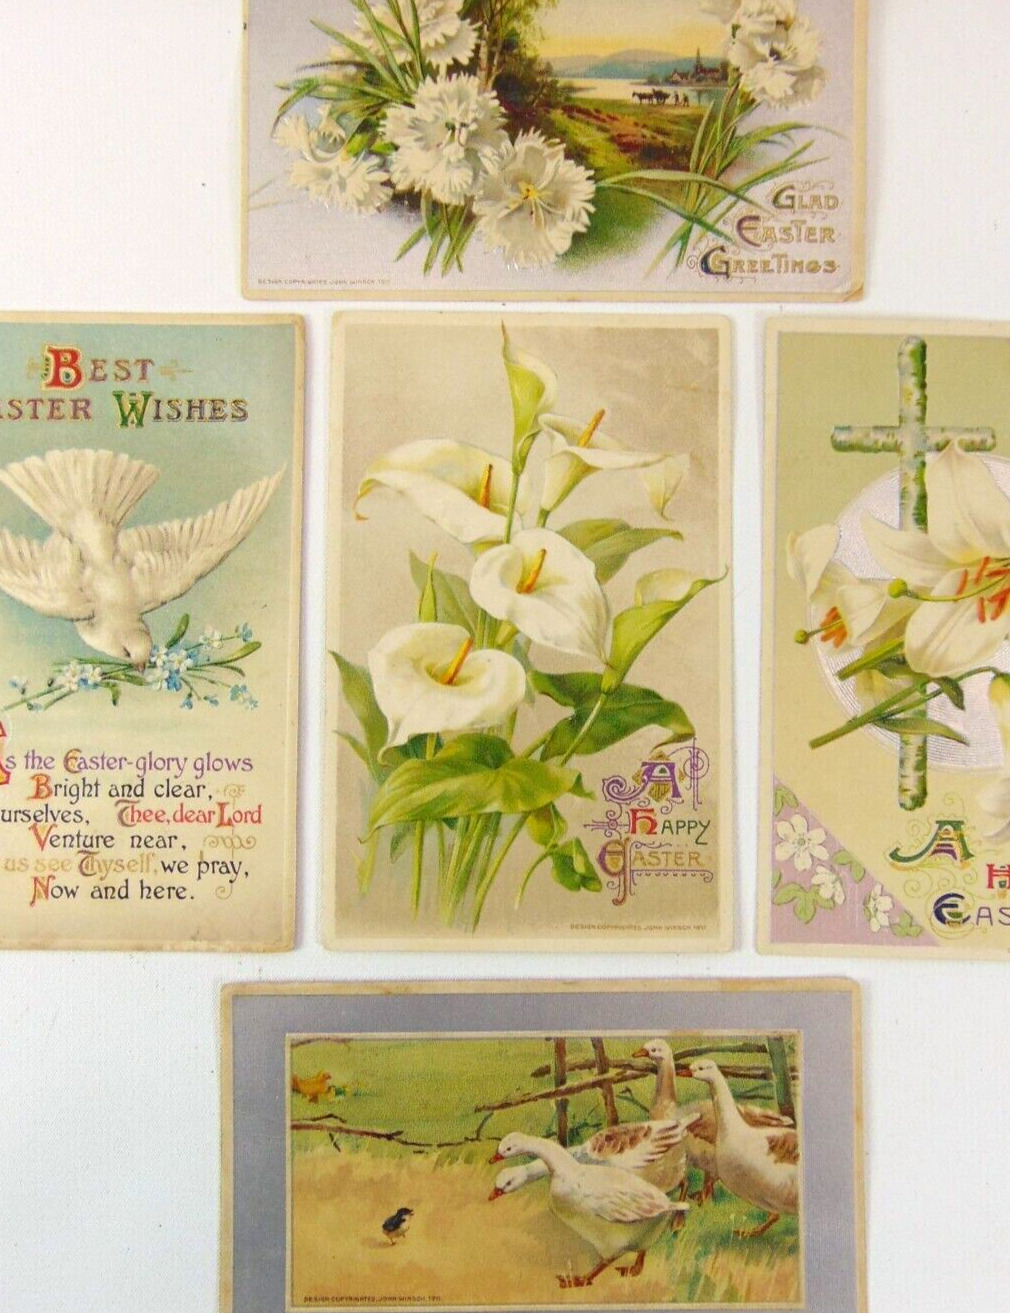 Lot of 5 Antique John Winsch Postcards ~ Easter Greetings ~ Doves & Flowers